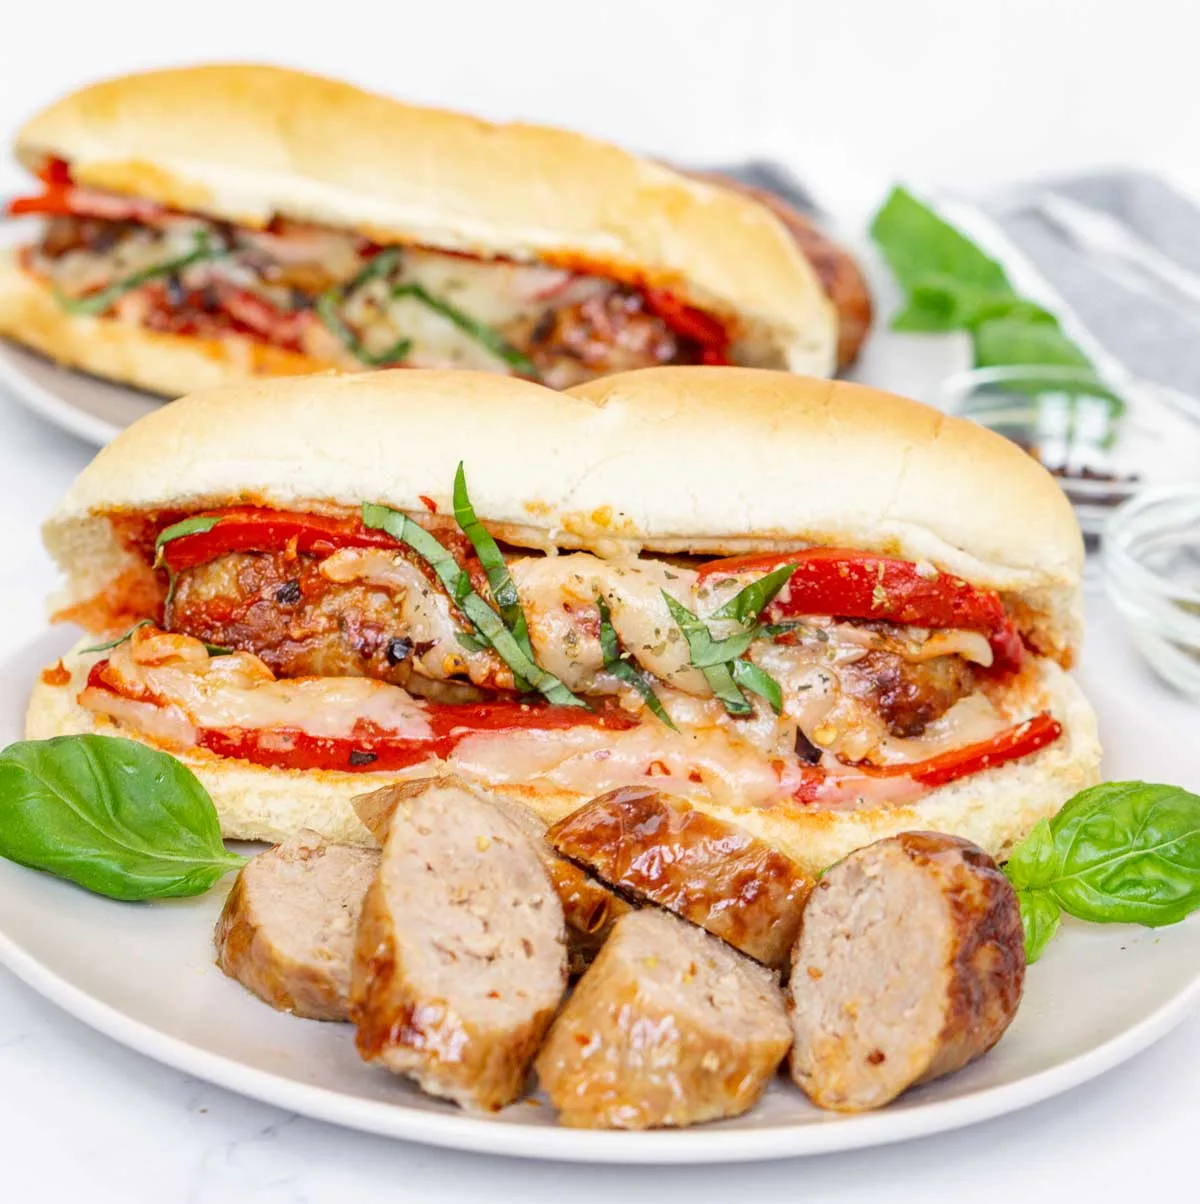 Air fried Italian sausages and sandwich on a plate